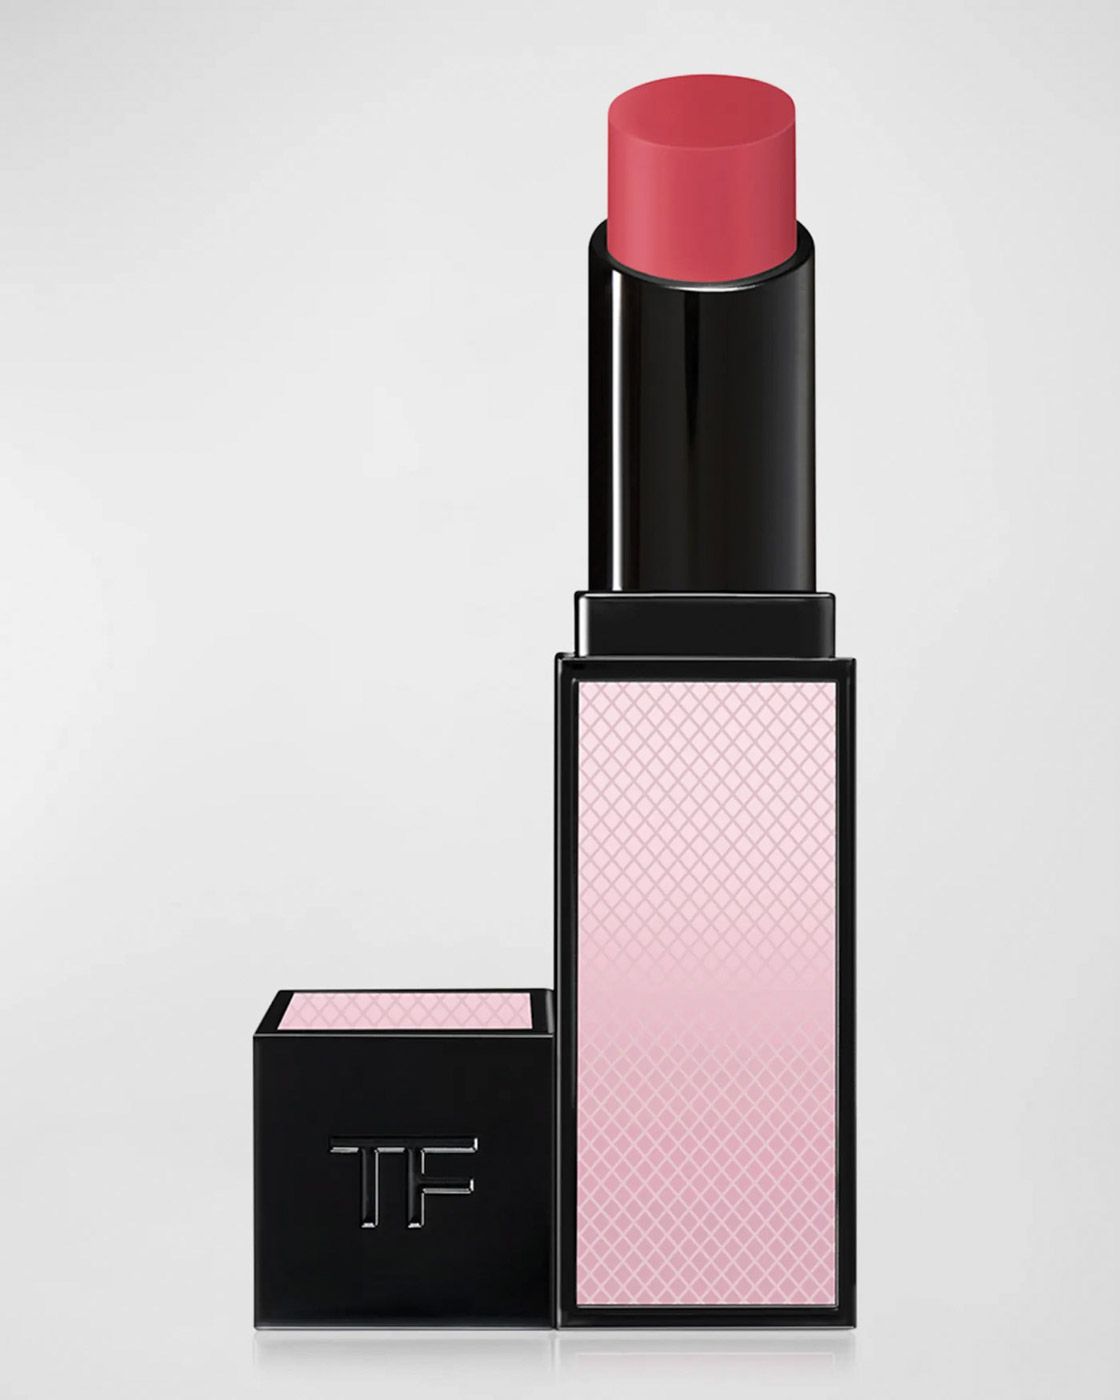 48 Tom Ford Satin Matte Lip Color $72 Availble At Neiman Marcus